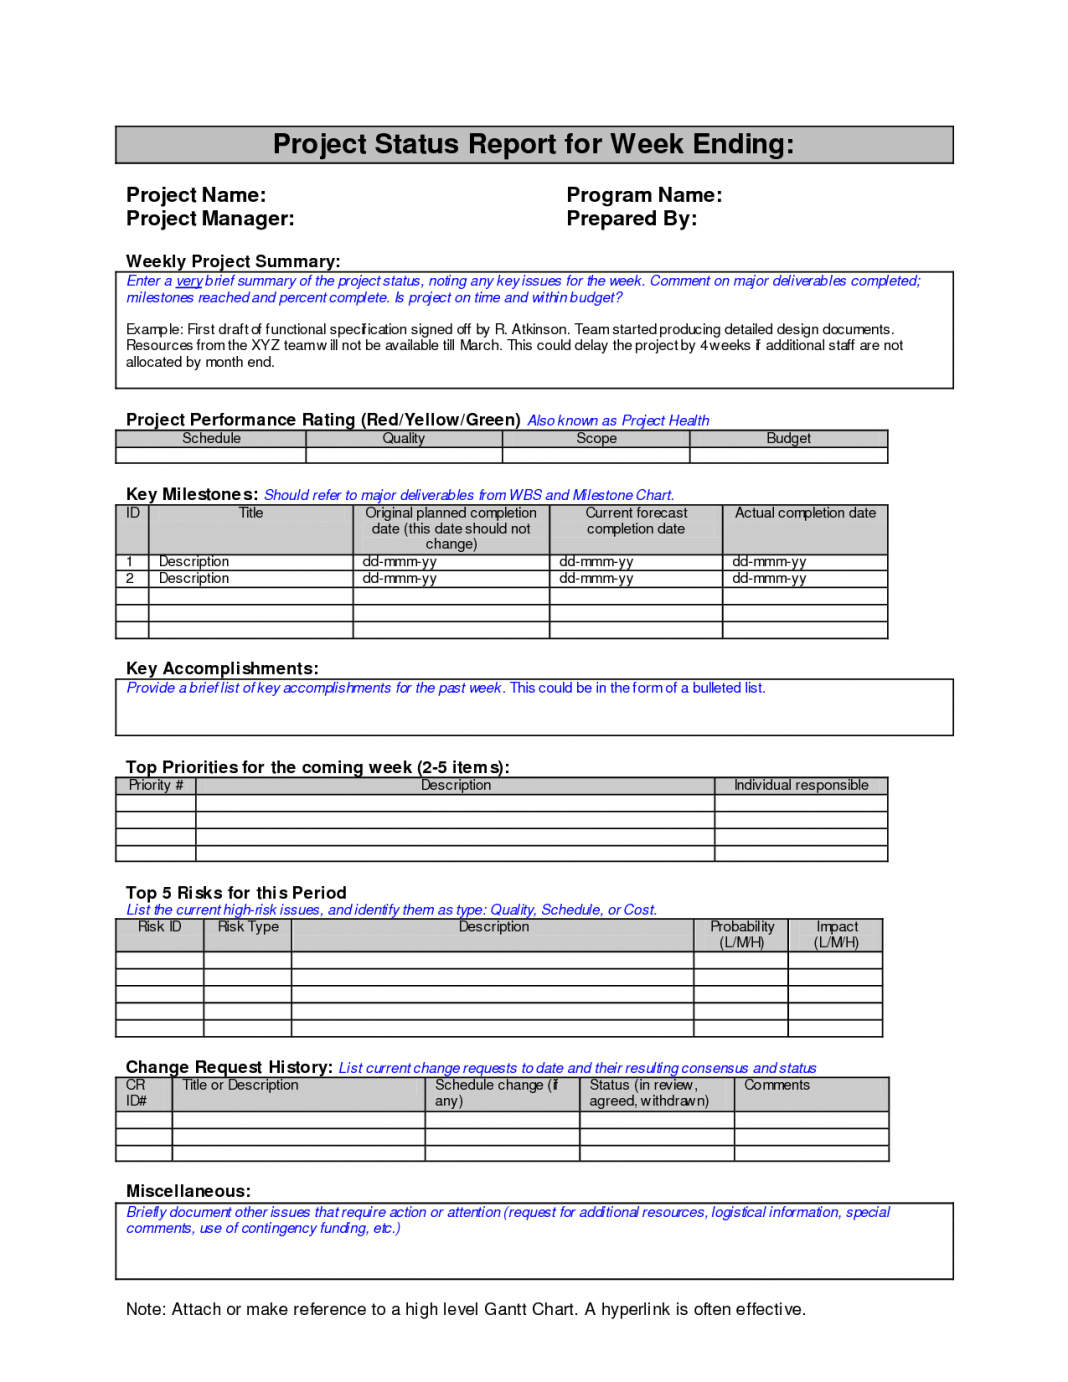 Software Testing Weekly Status Report Template Maxresdefault Regarding Software Testing Weekly Status Report Template